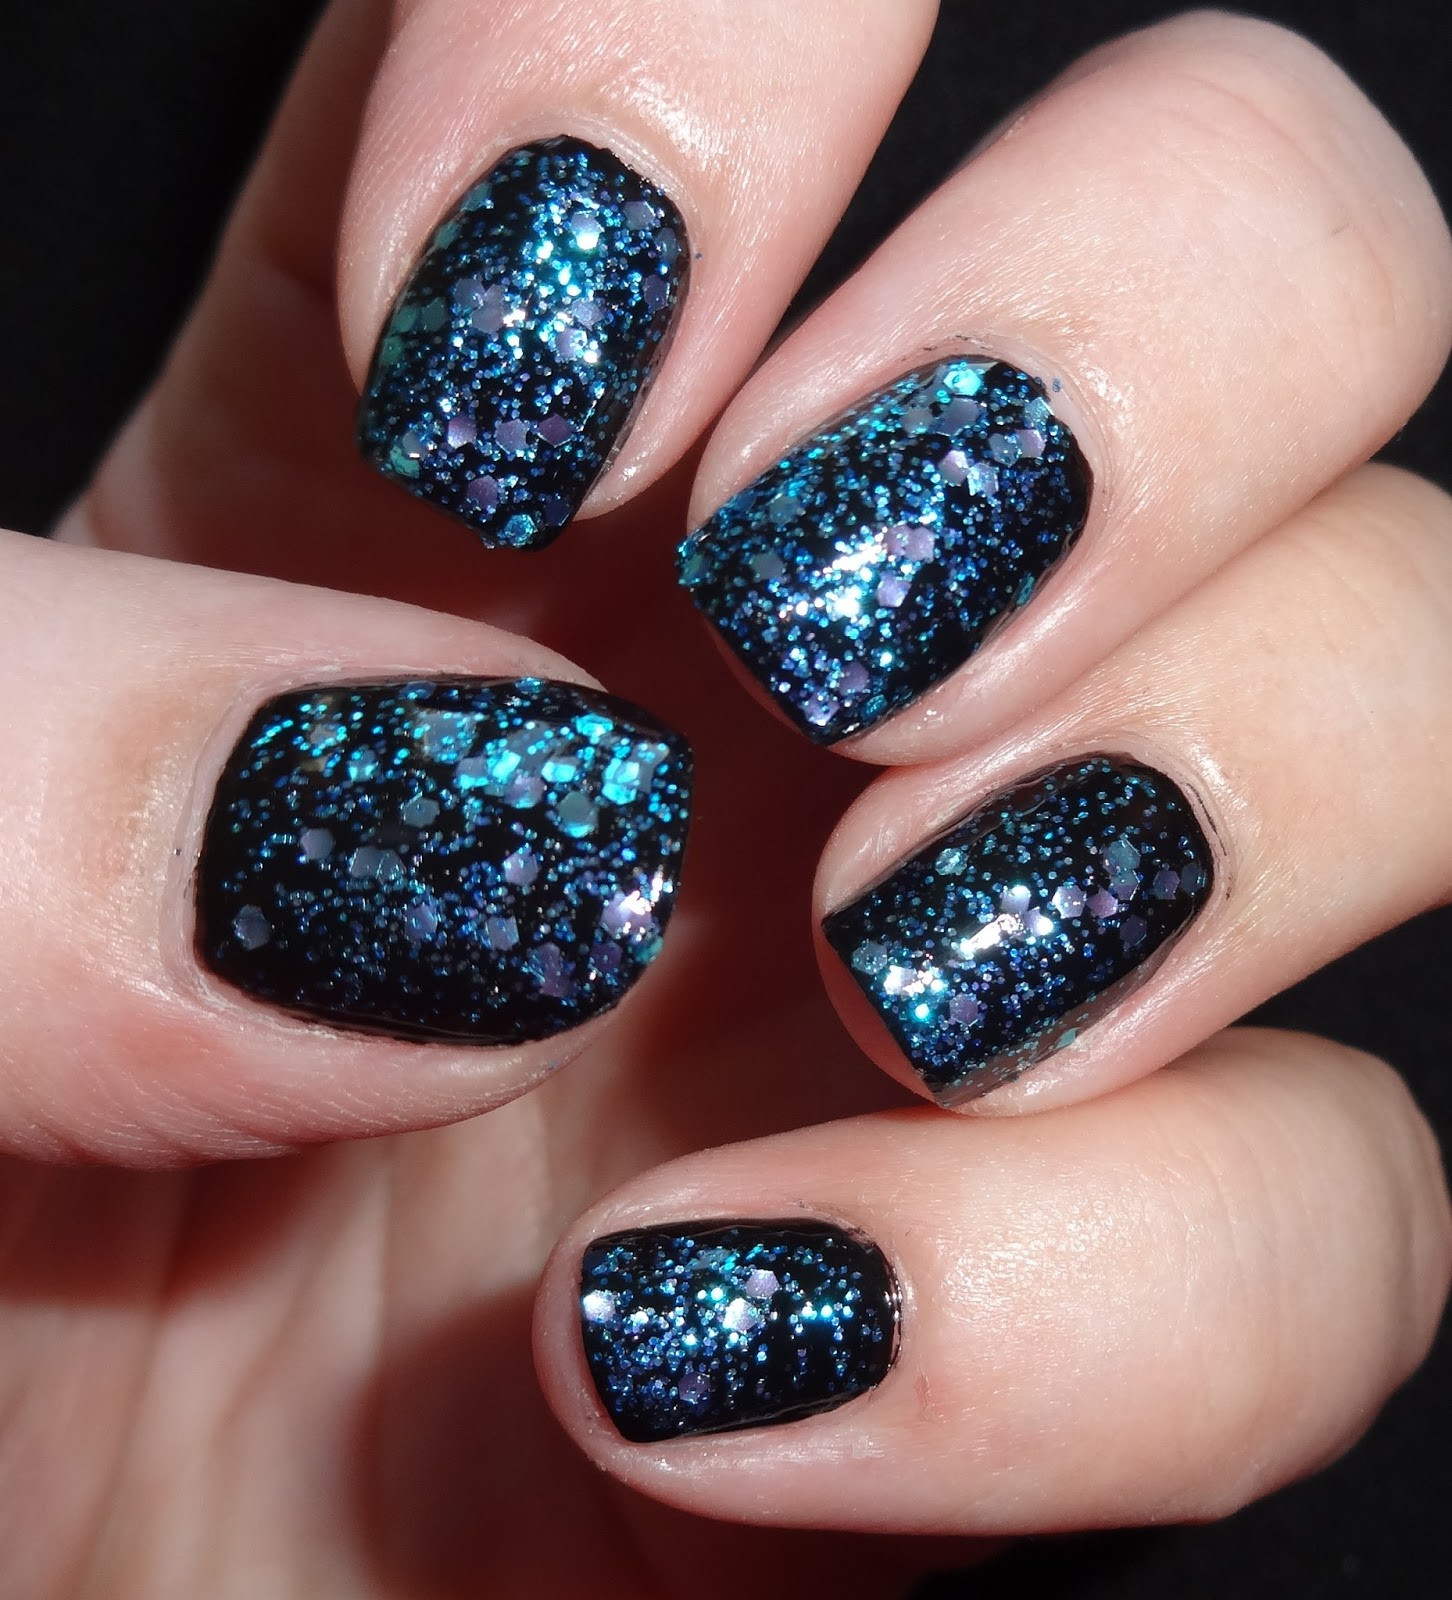 Nail Colors With Glitter
 Wendy s Delights Tmart Glitter Nail Polish Ocean Blue